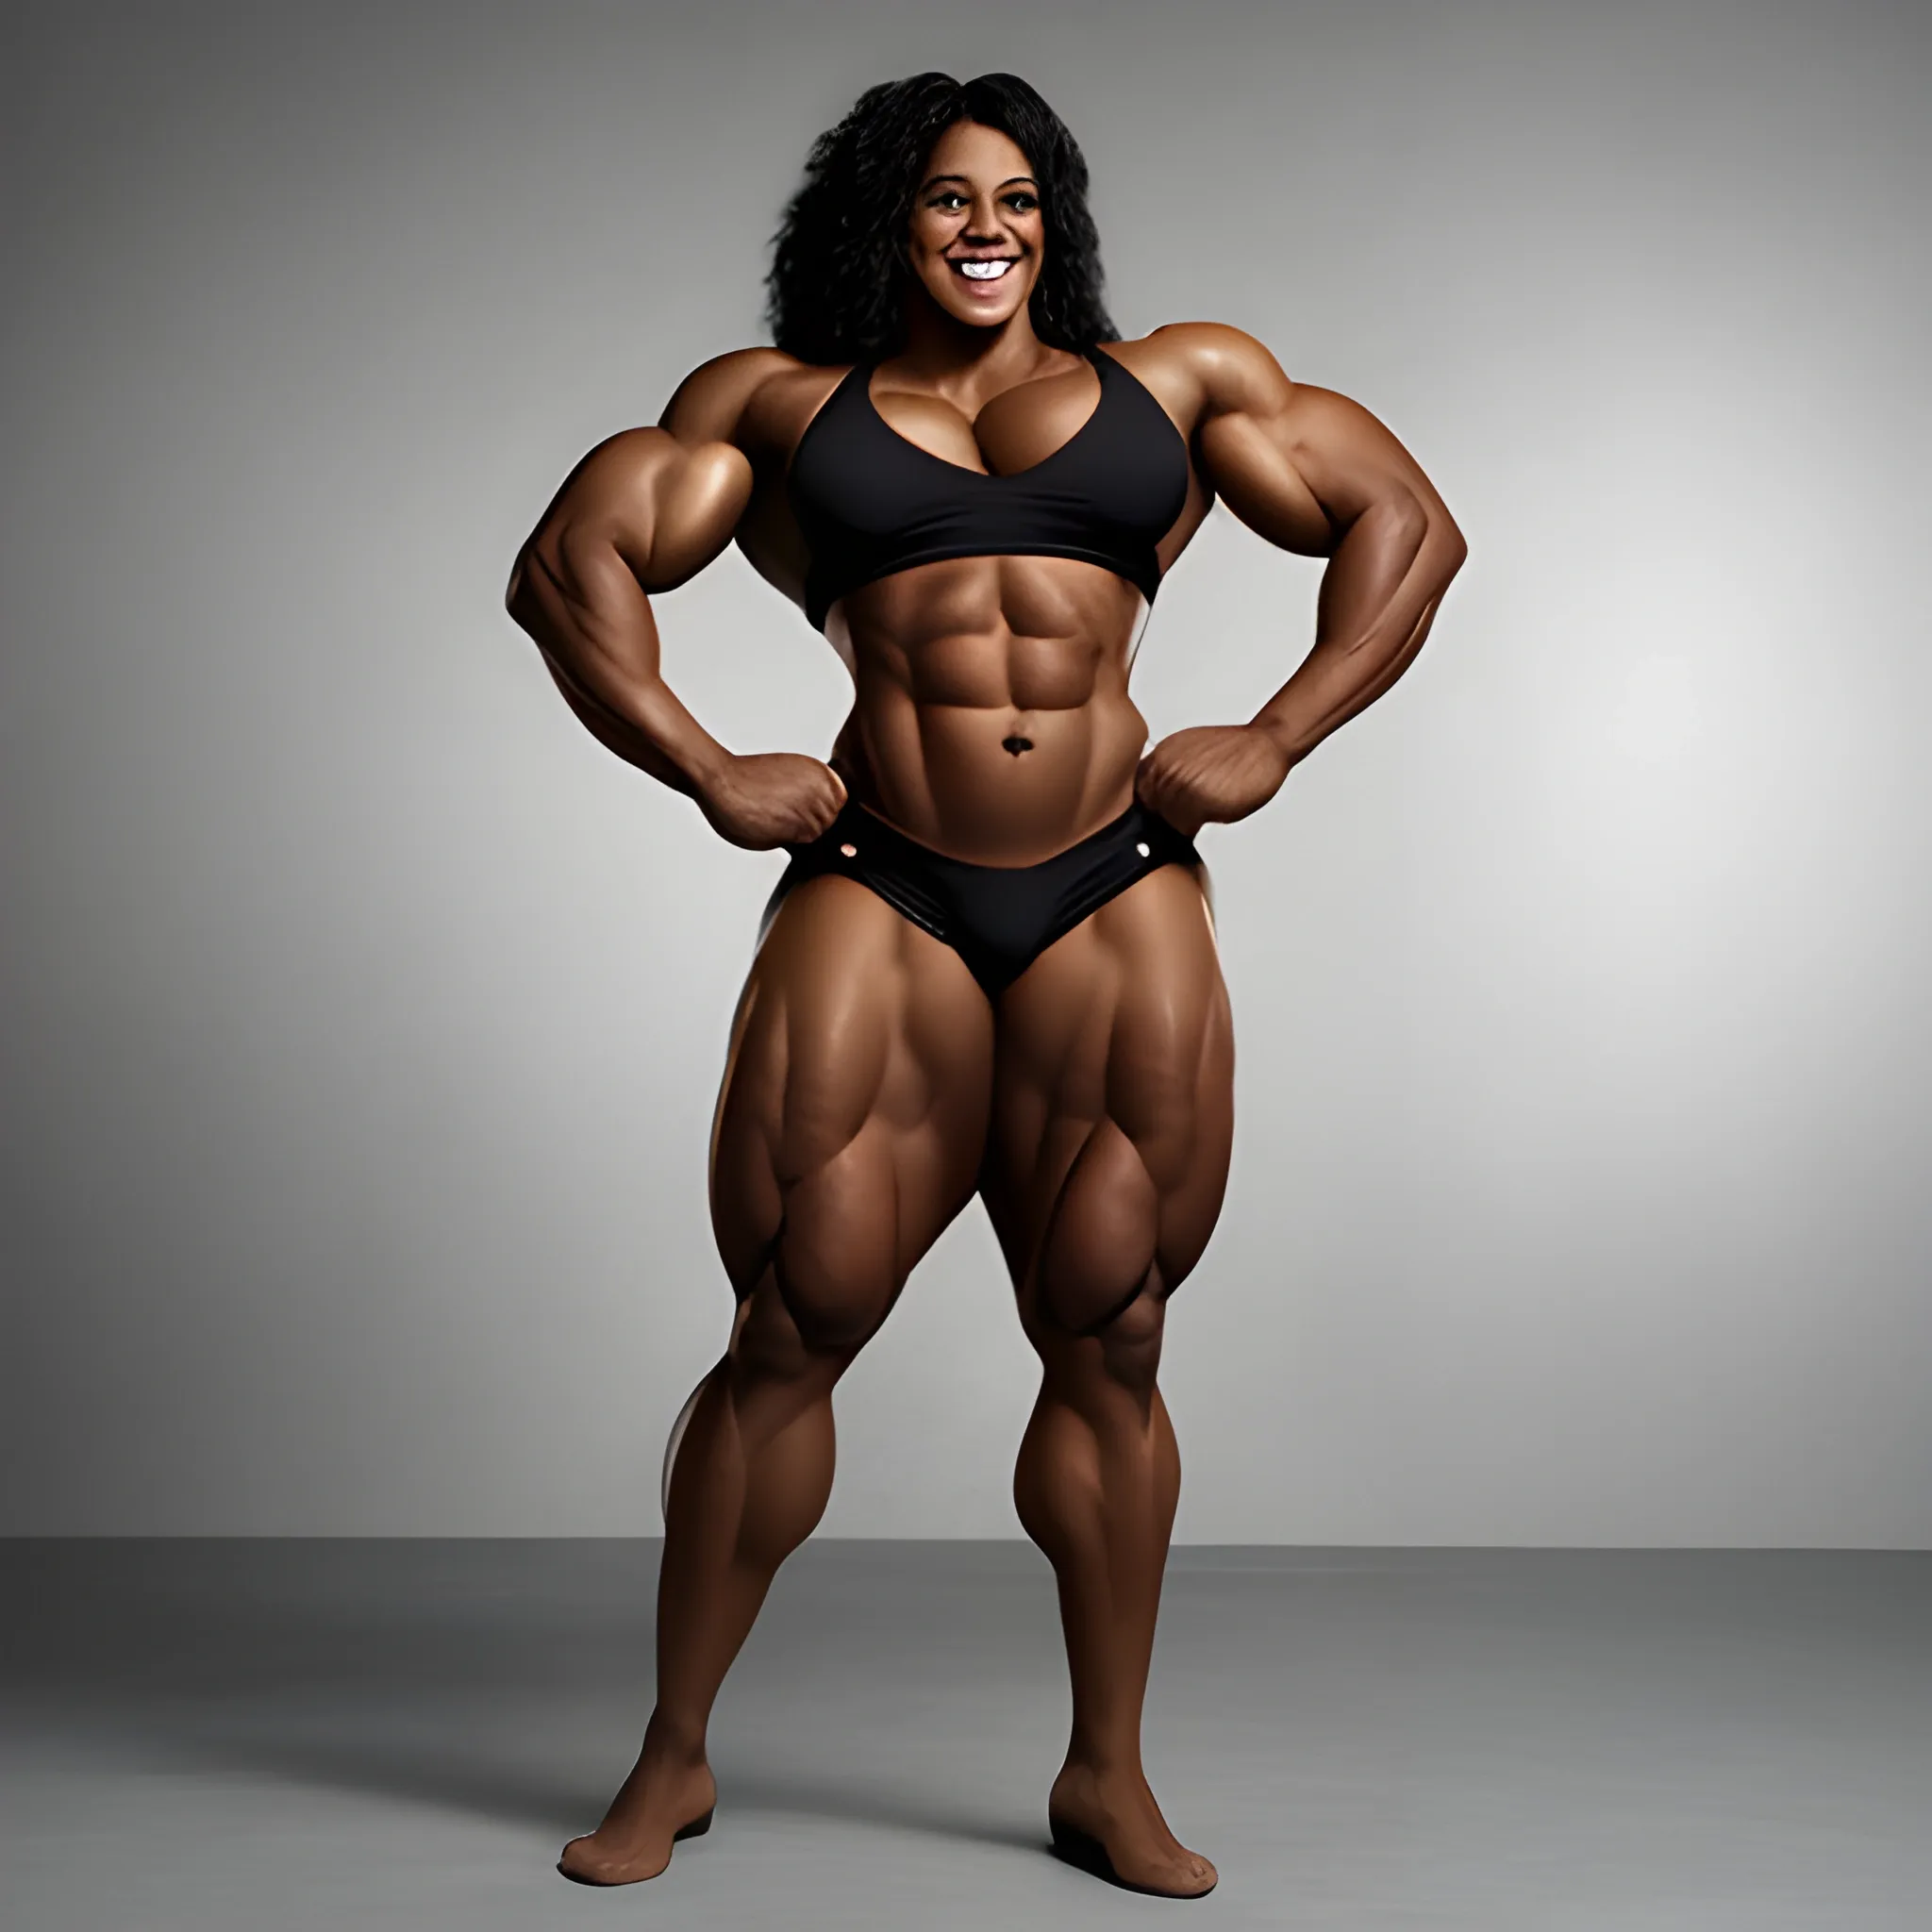 a full-body image of a triumphant heavyweight beautiful black black female bodybuilder with wide-set eyes with very narrow hips and waist, extremely muscular, hulkish, extremely wide shoulder-to-shoulder distance over 240 cm, extremely wide chest, smiling, expressive eyes, ten-pack abs, perfect in every way, chesty musculature with big shoulders and big biceps.

